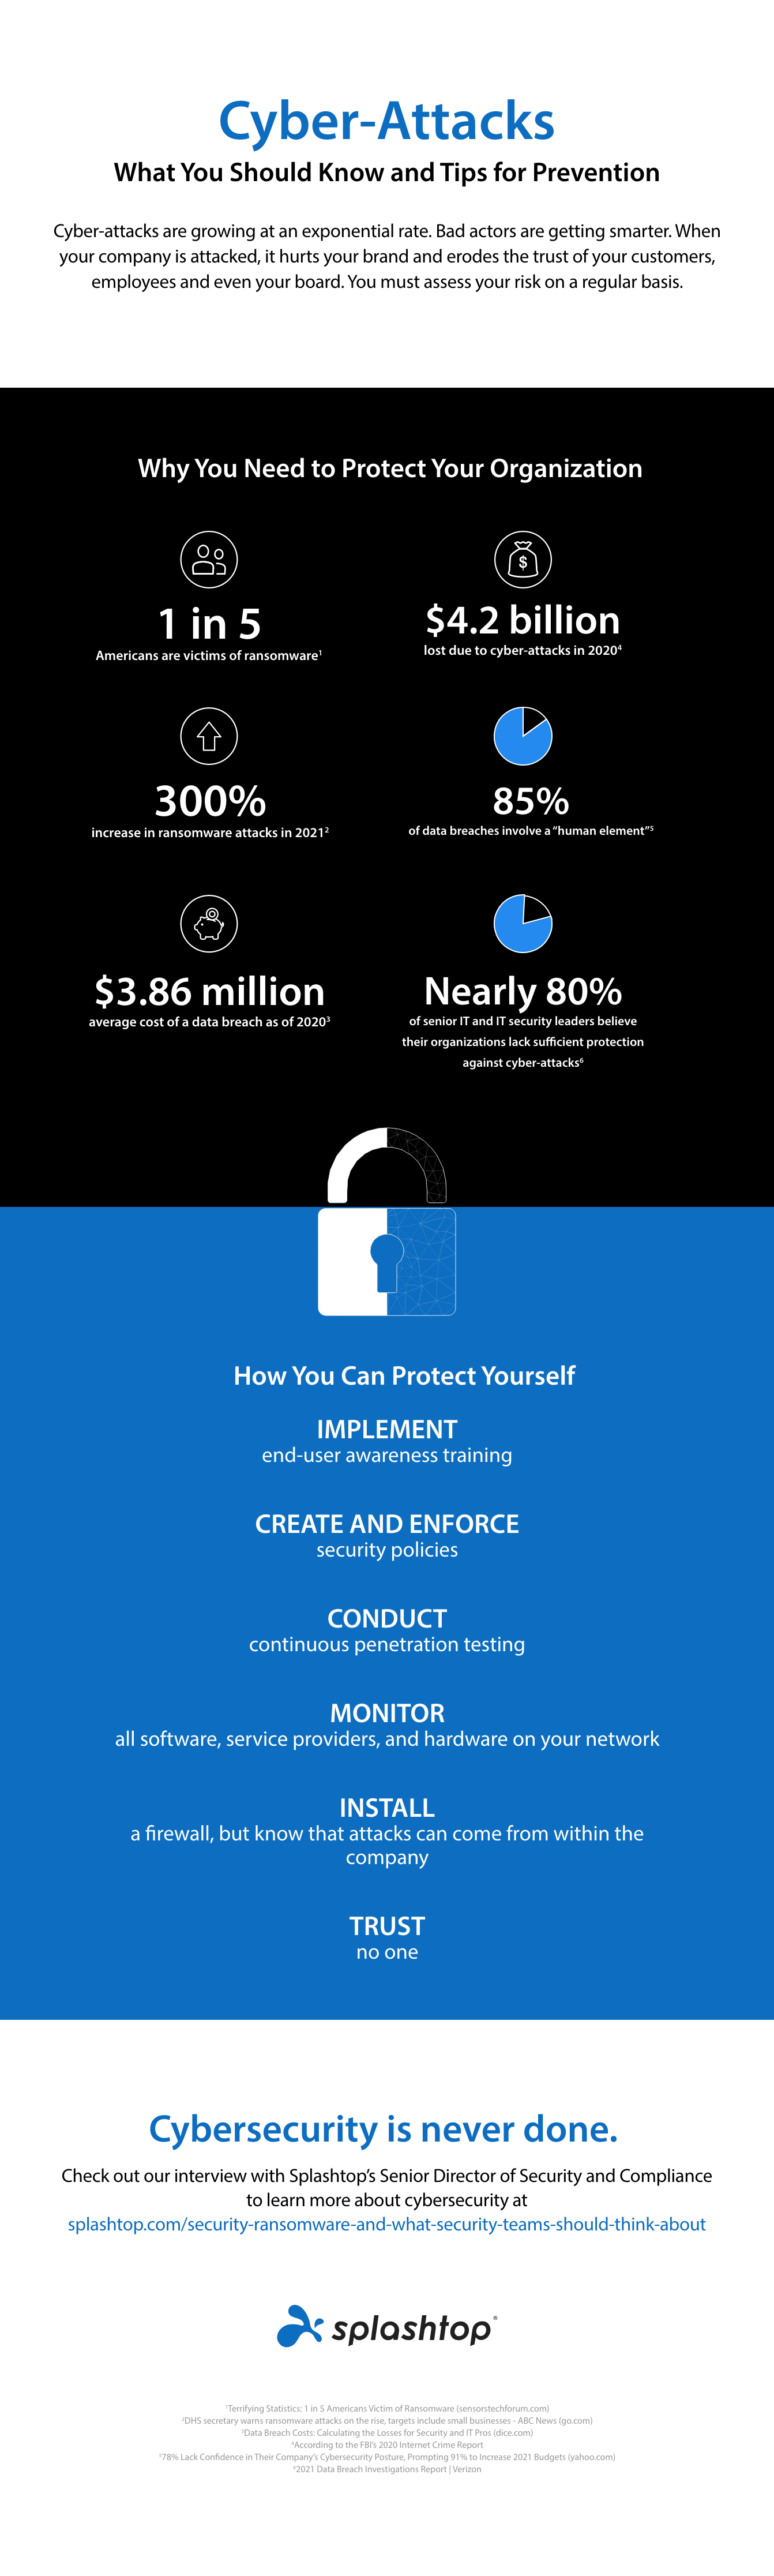 Cyber-Attacks Infographic Vertical